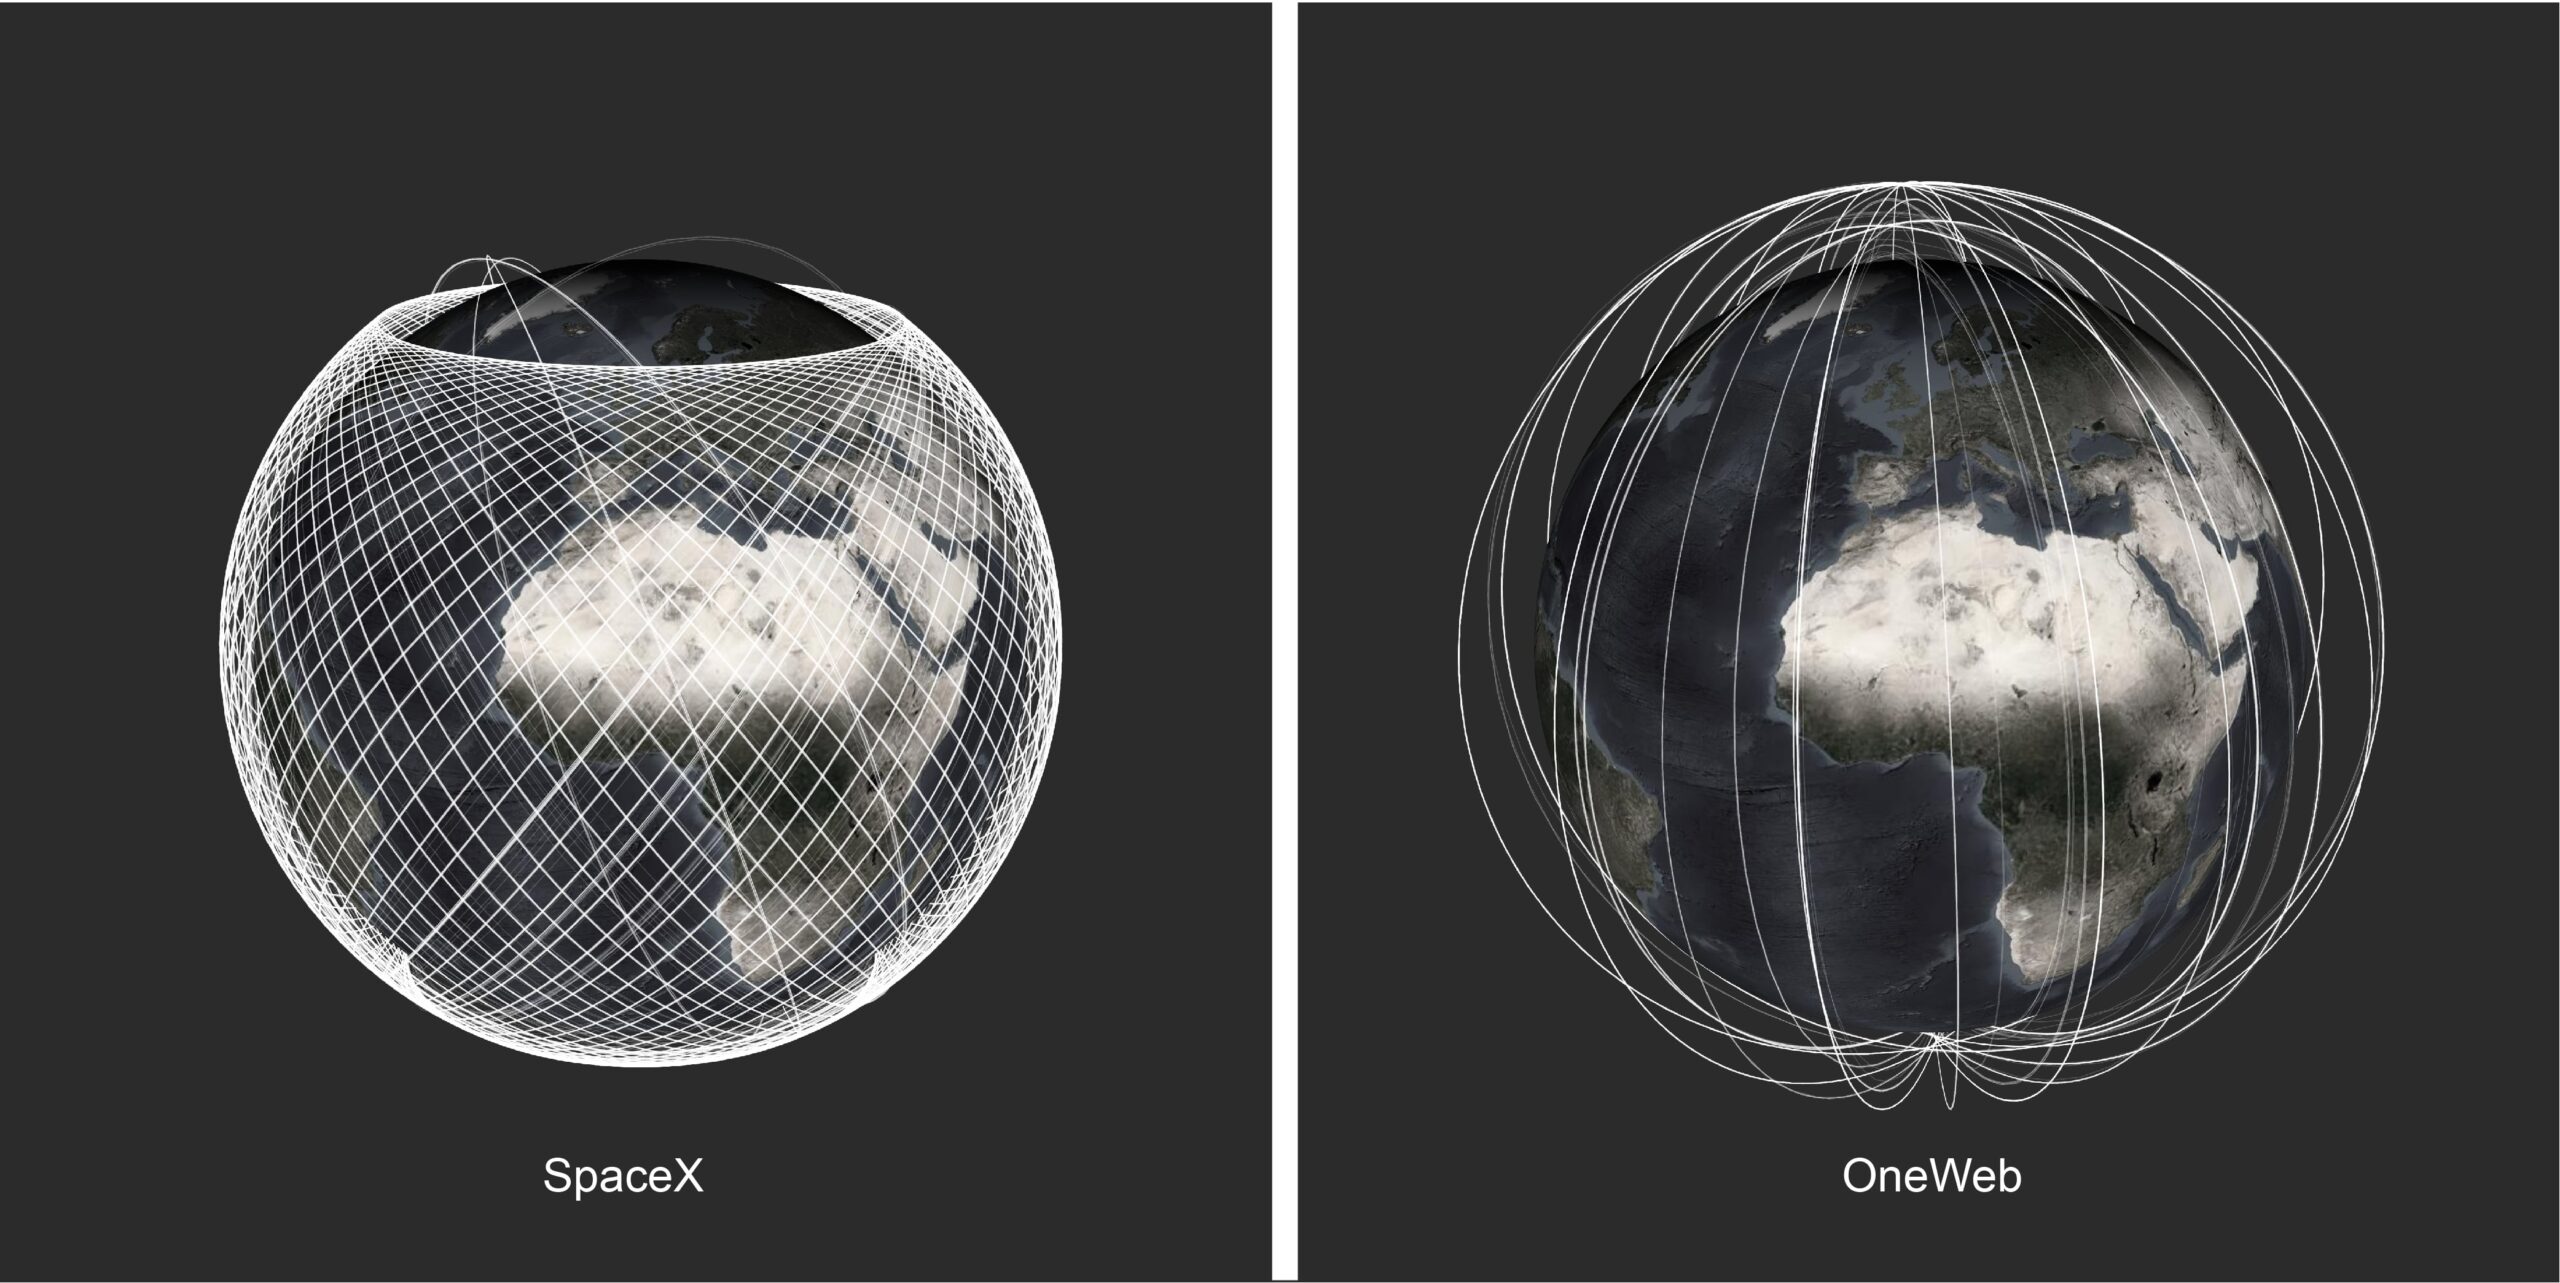 Image of SpaceX and OneWeb constellations